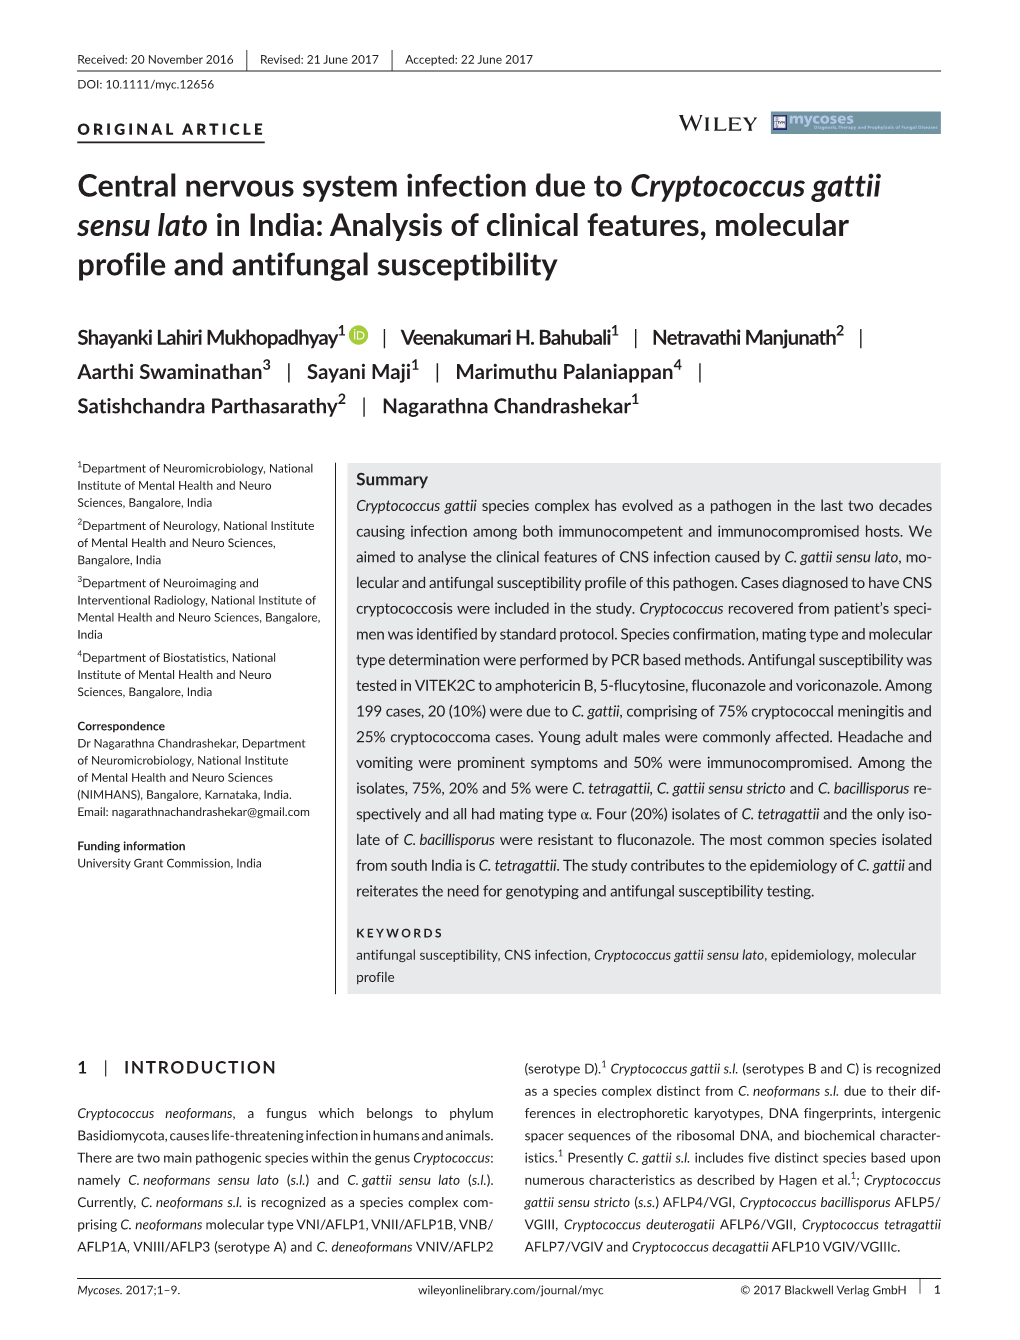 Central Nervous System Infection Due to Cryptococcus Gattii Sensu Lato in India: Analysis of Clinical Features, Molecular Profile and Antifungal Susceptibility